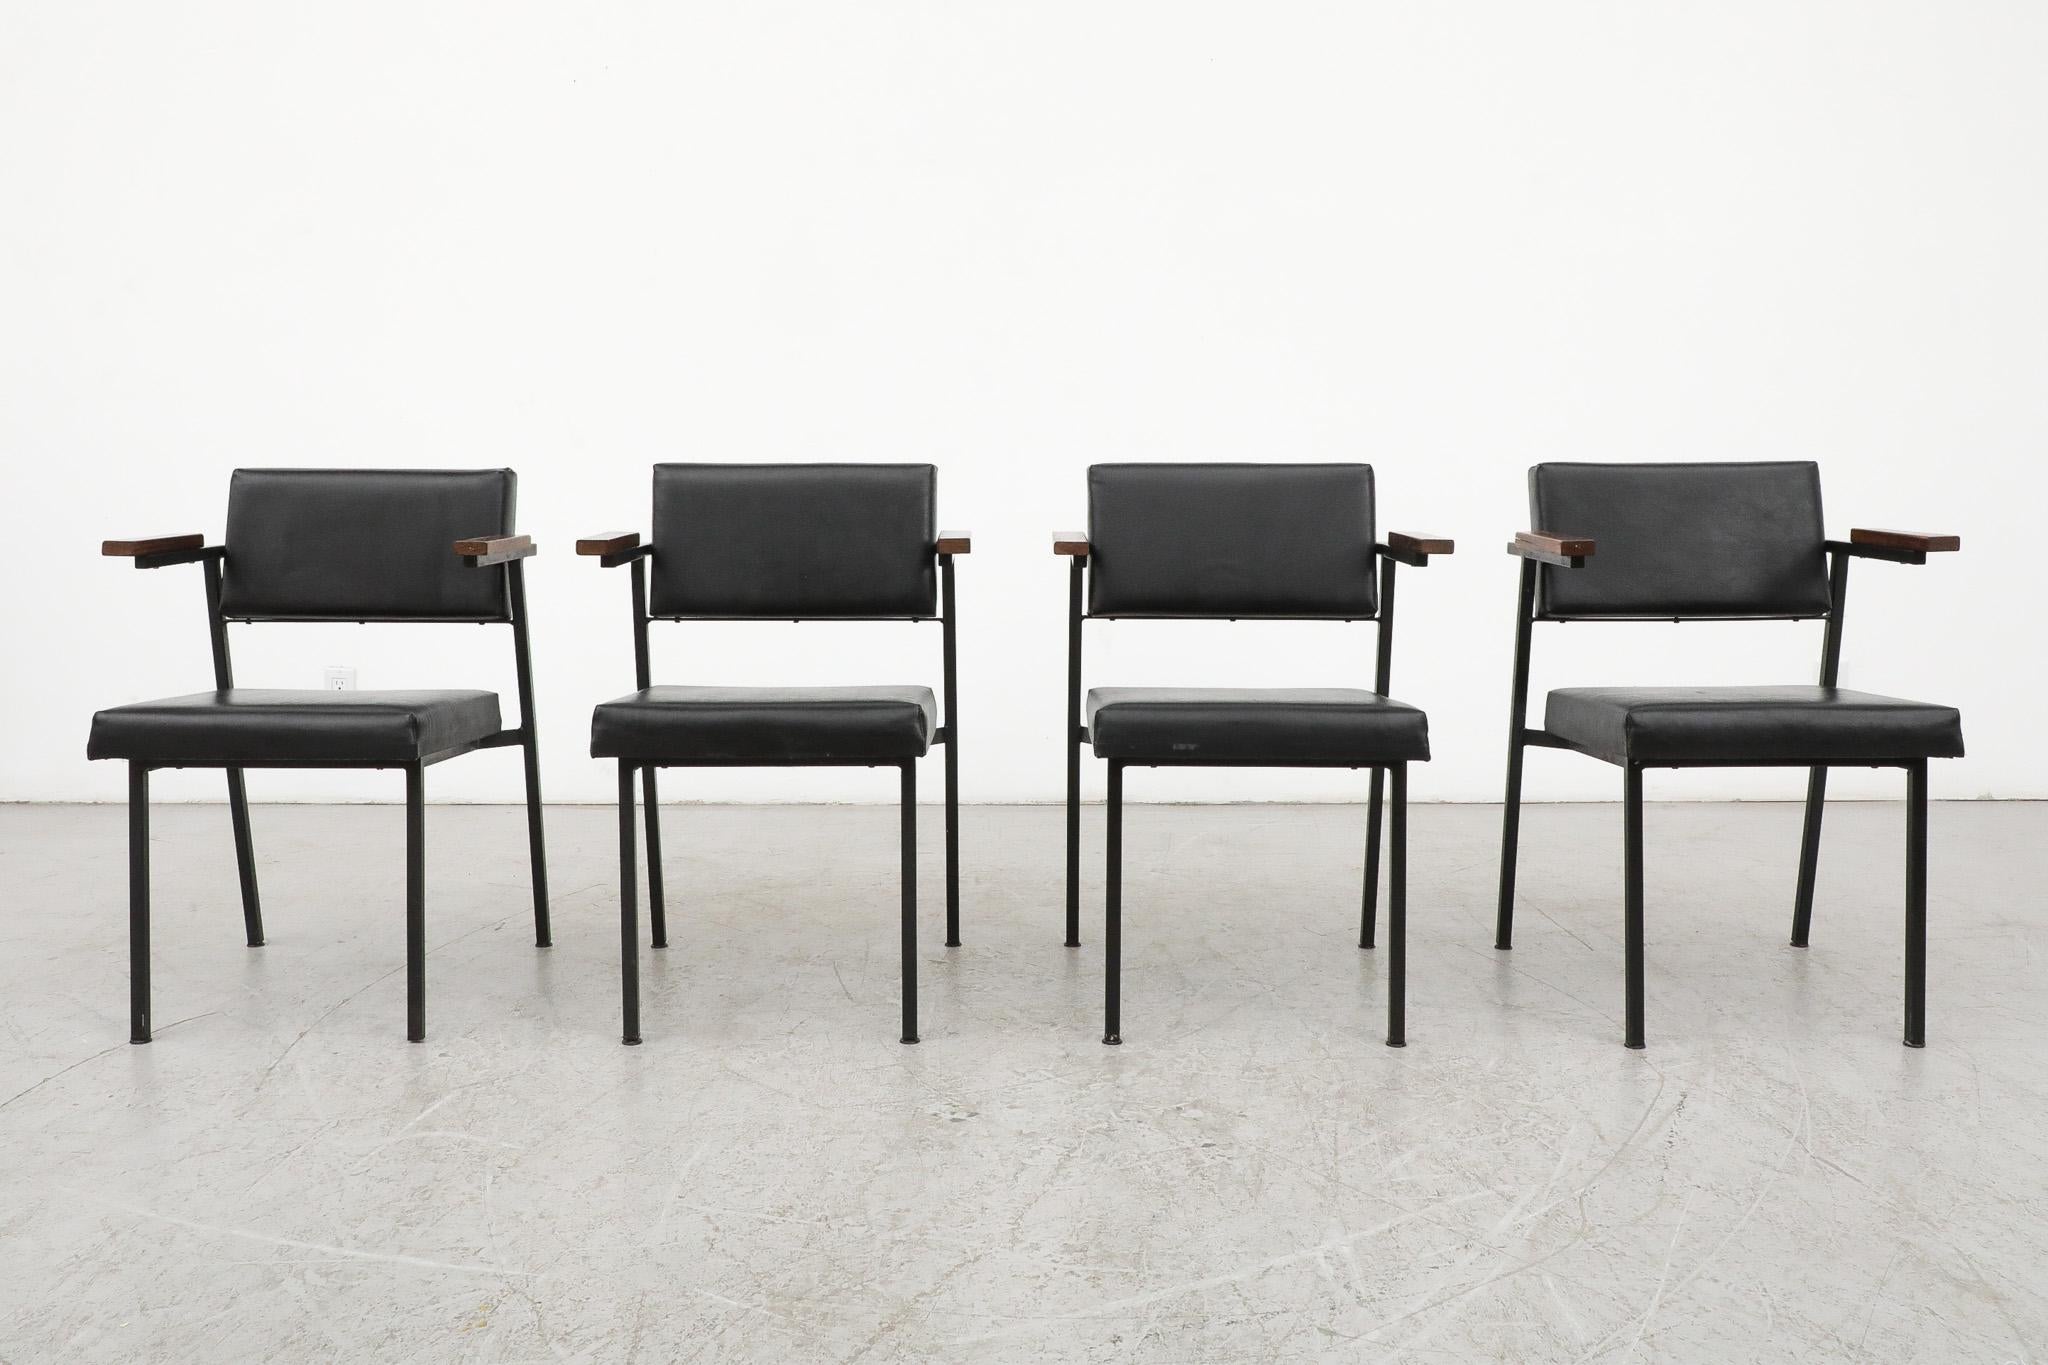 Set of 4 'SE 69' dining chairs by Martin Visser for 't Spectrum 1959. The chairs have black enameled frames with wenge armrests and black skai upholstery. Visser, a quintessential designer of the Dutch post-war design movement began working for 't